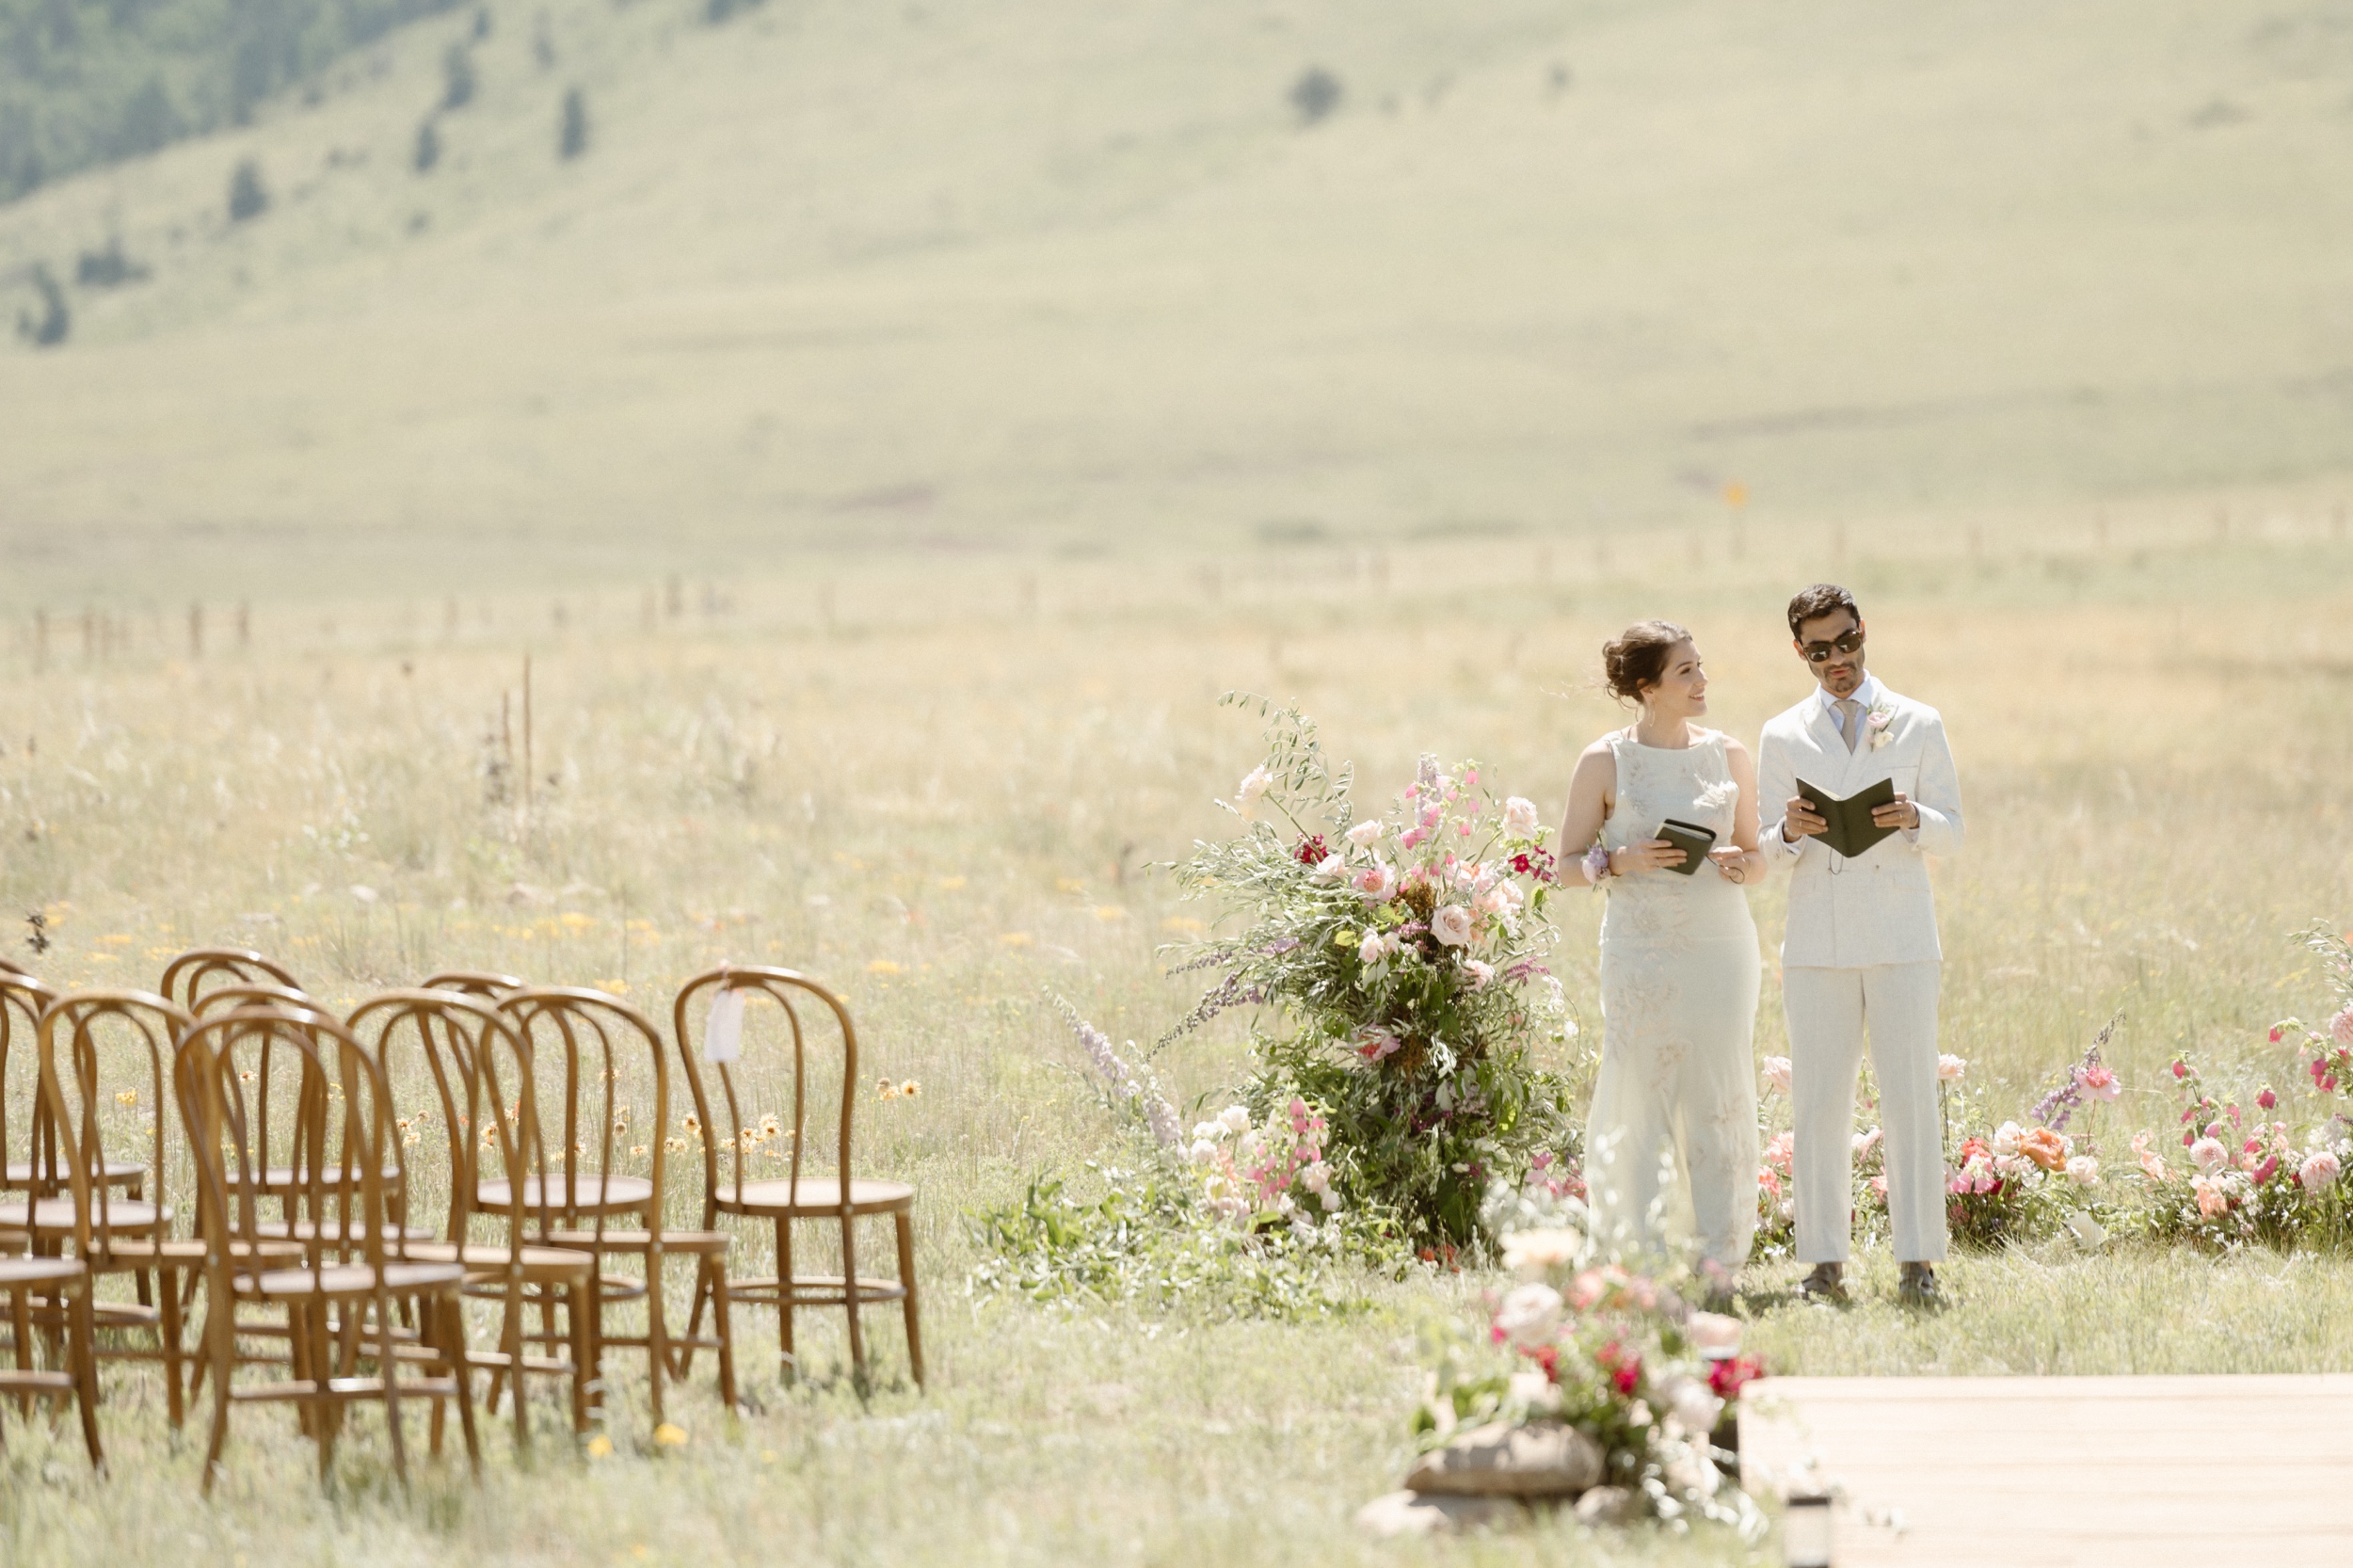 Two officiants standing at the ceremony space for a Three Peaks Ranch wedding. Photo by Colorado wedding photographer Ashley Joyce.